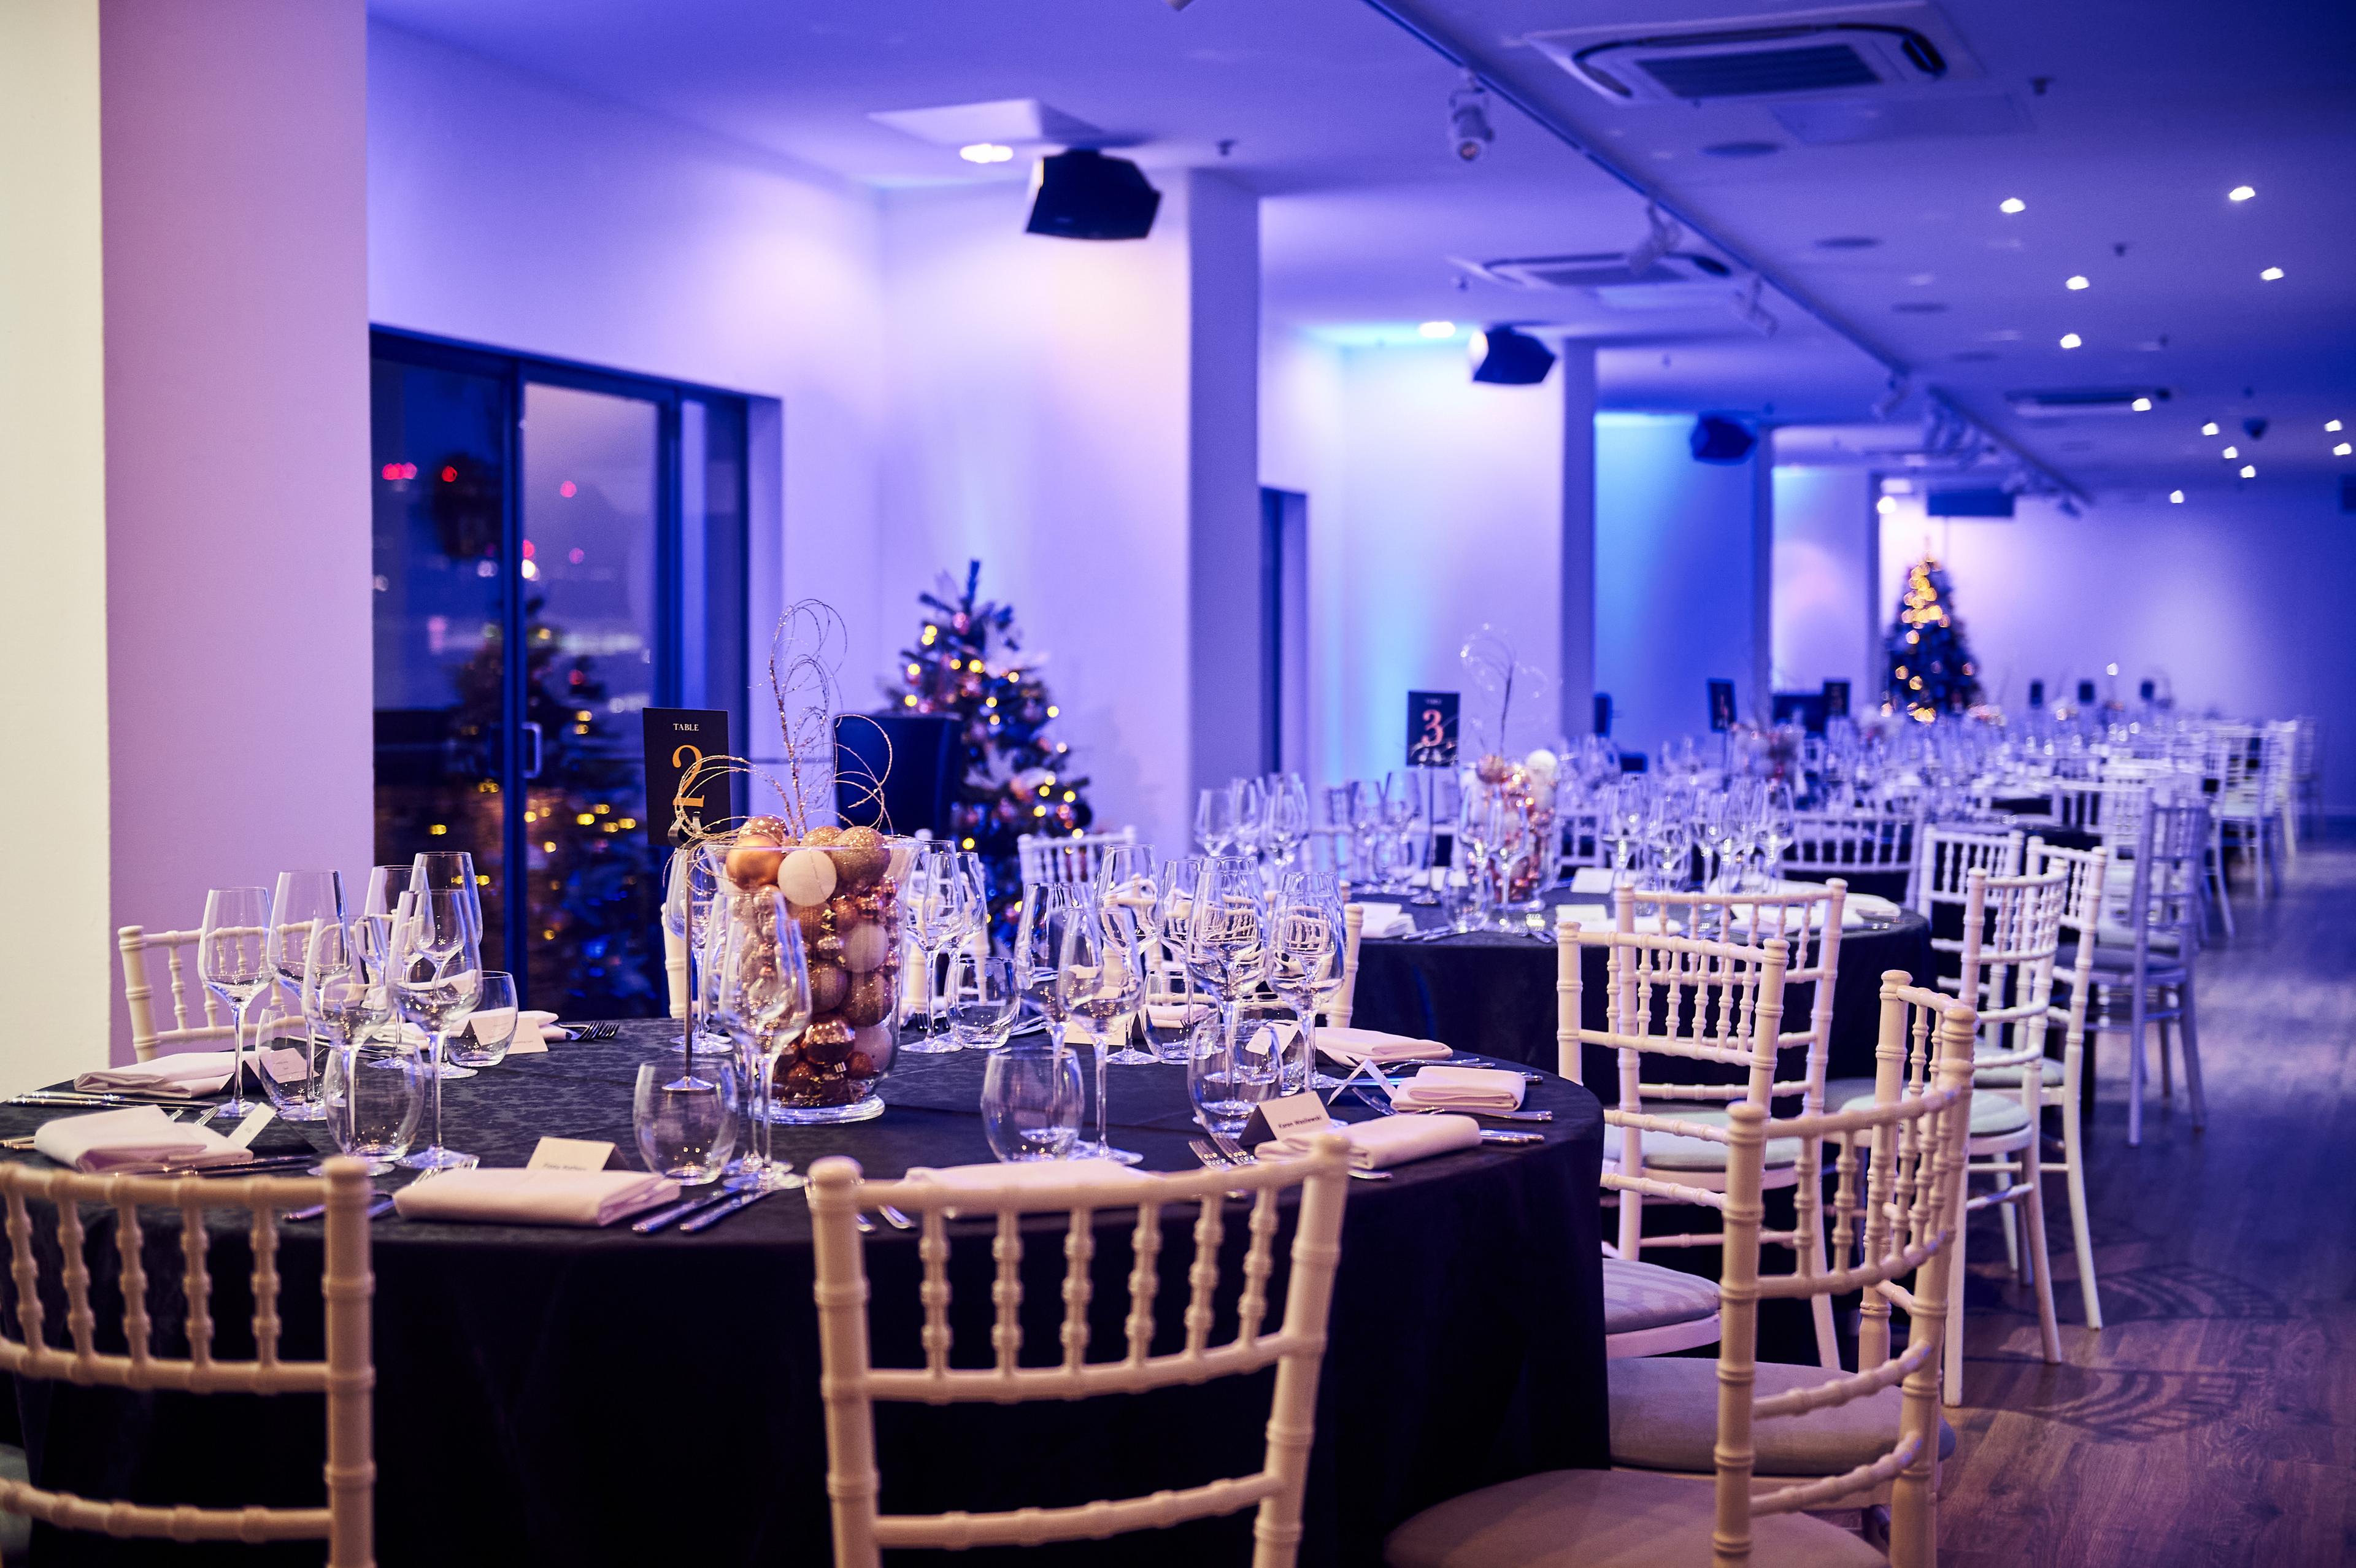 Exclusive Use Of Venue , OXO2 photo #17